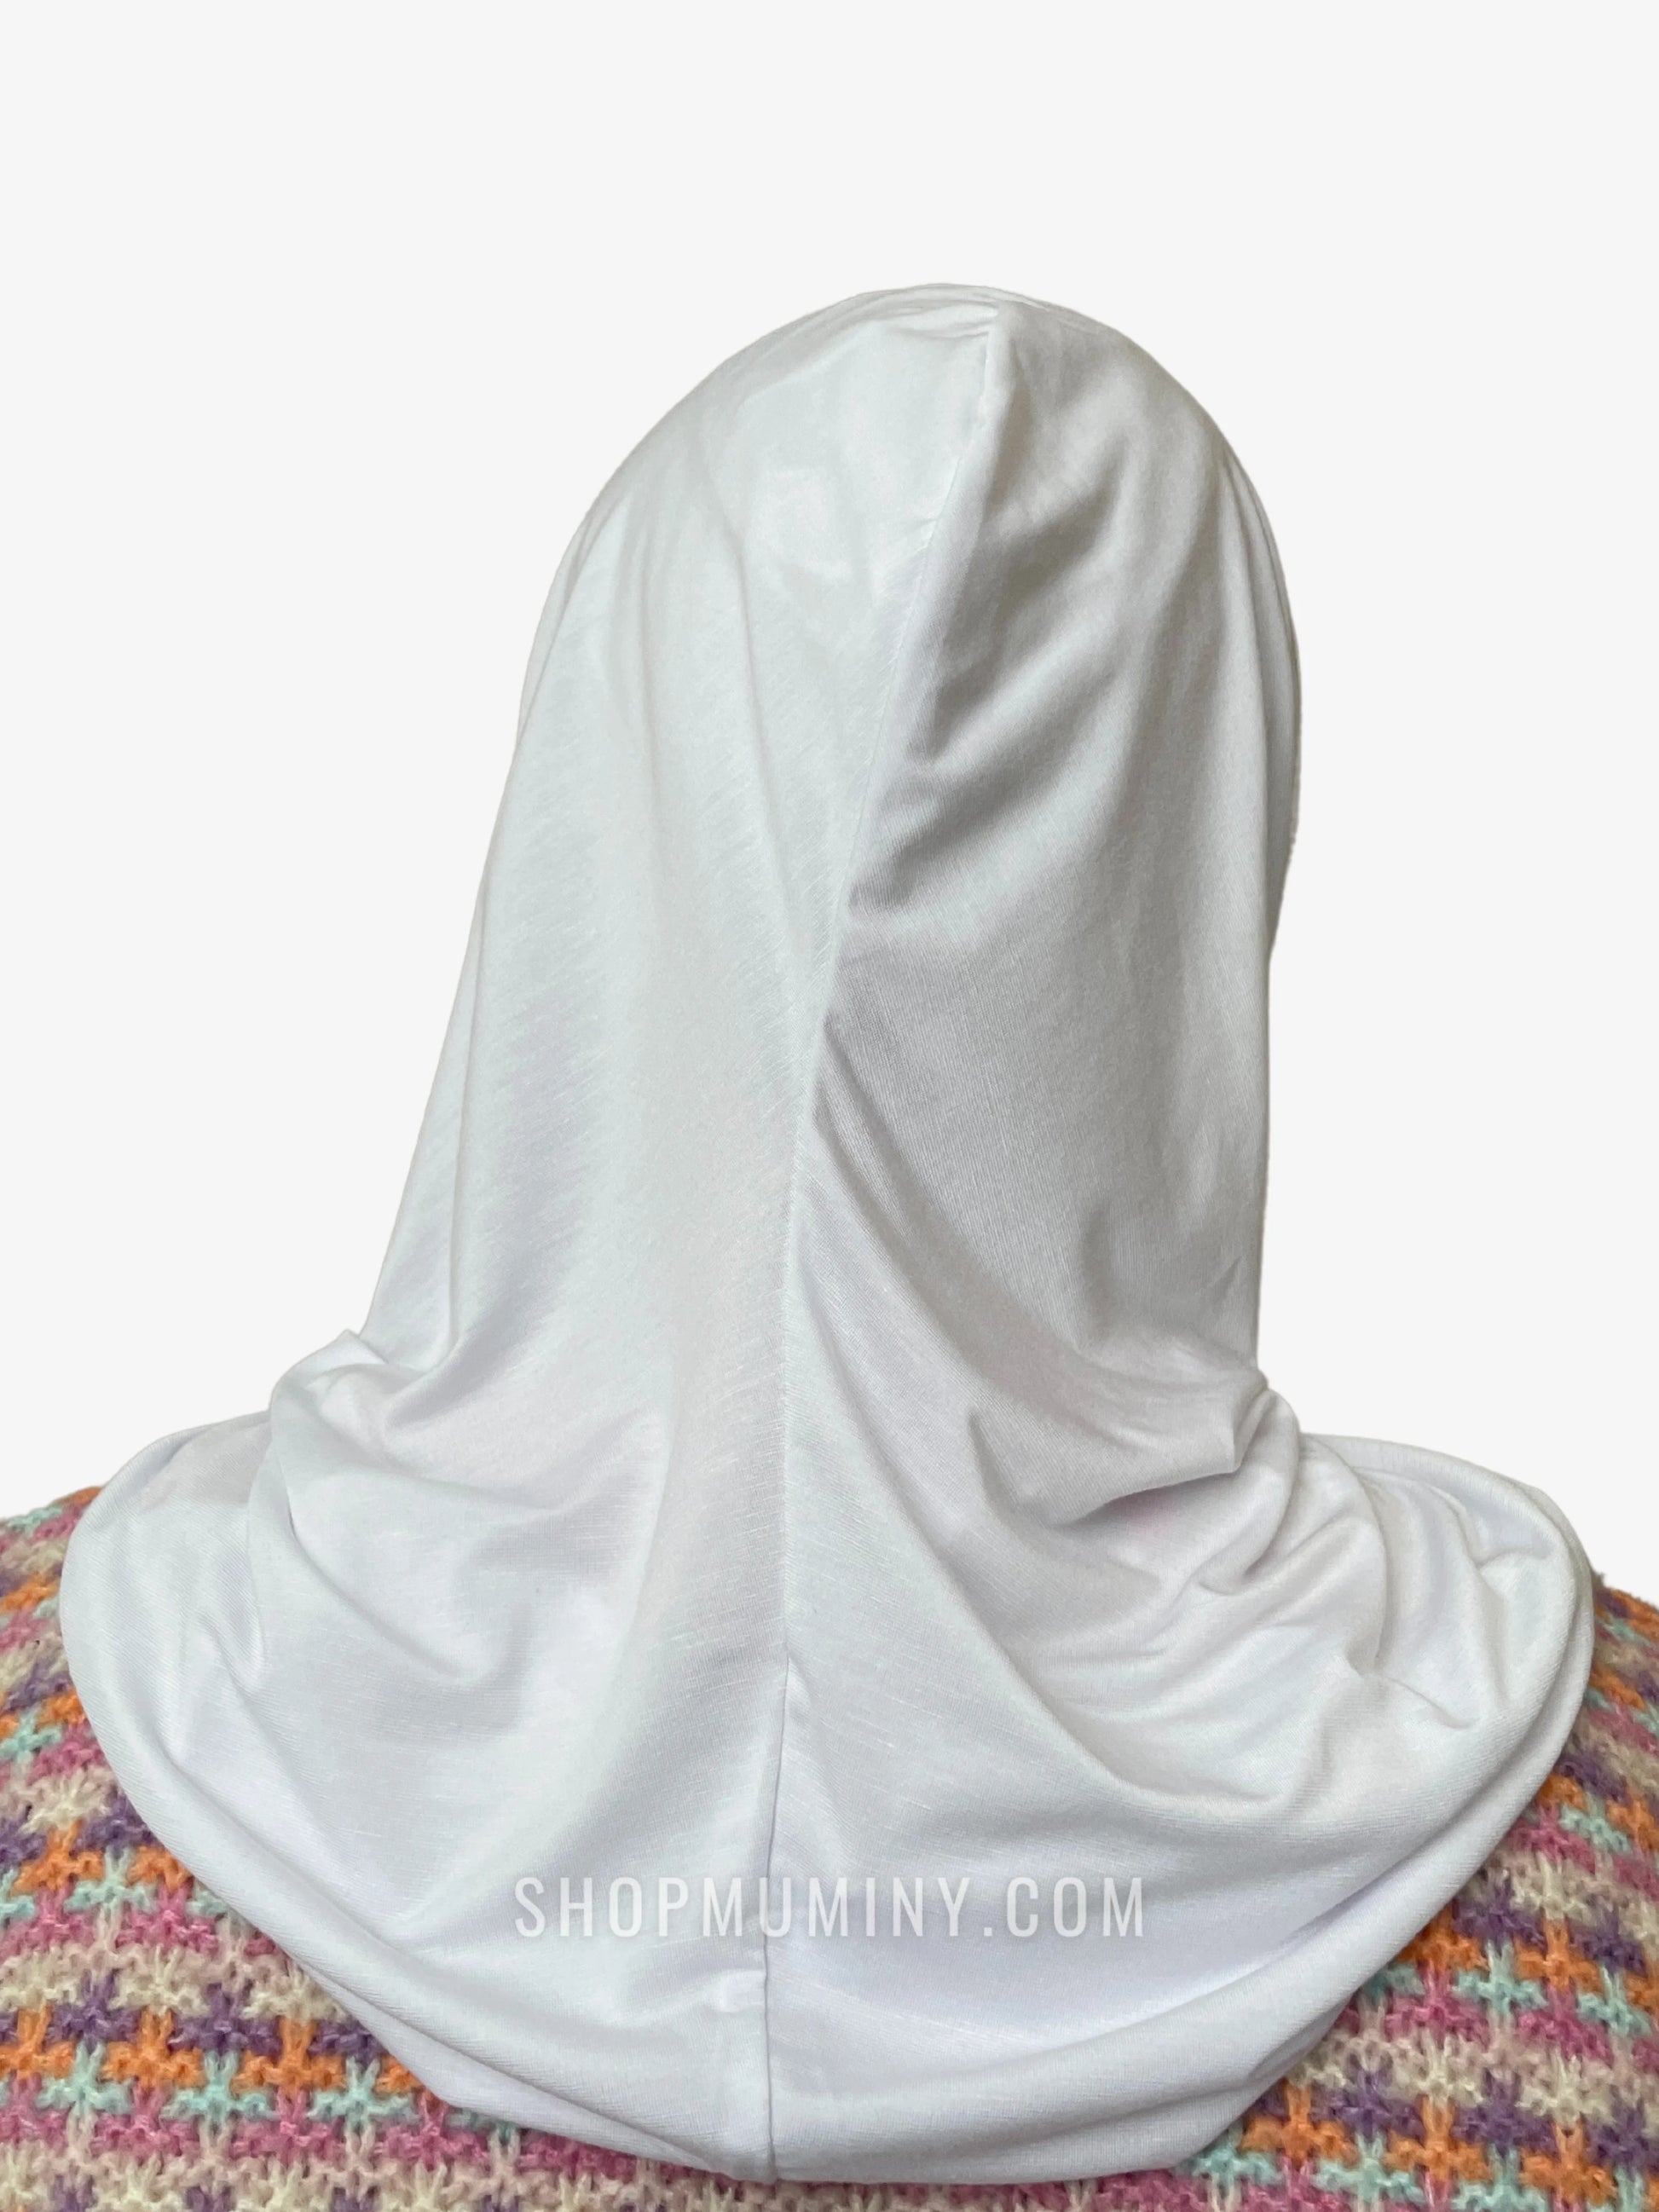 One-Piece Instant Jersey Hijab: Pearl White - Handmade One-Piece Instant Jersey Hijab from Muminy